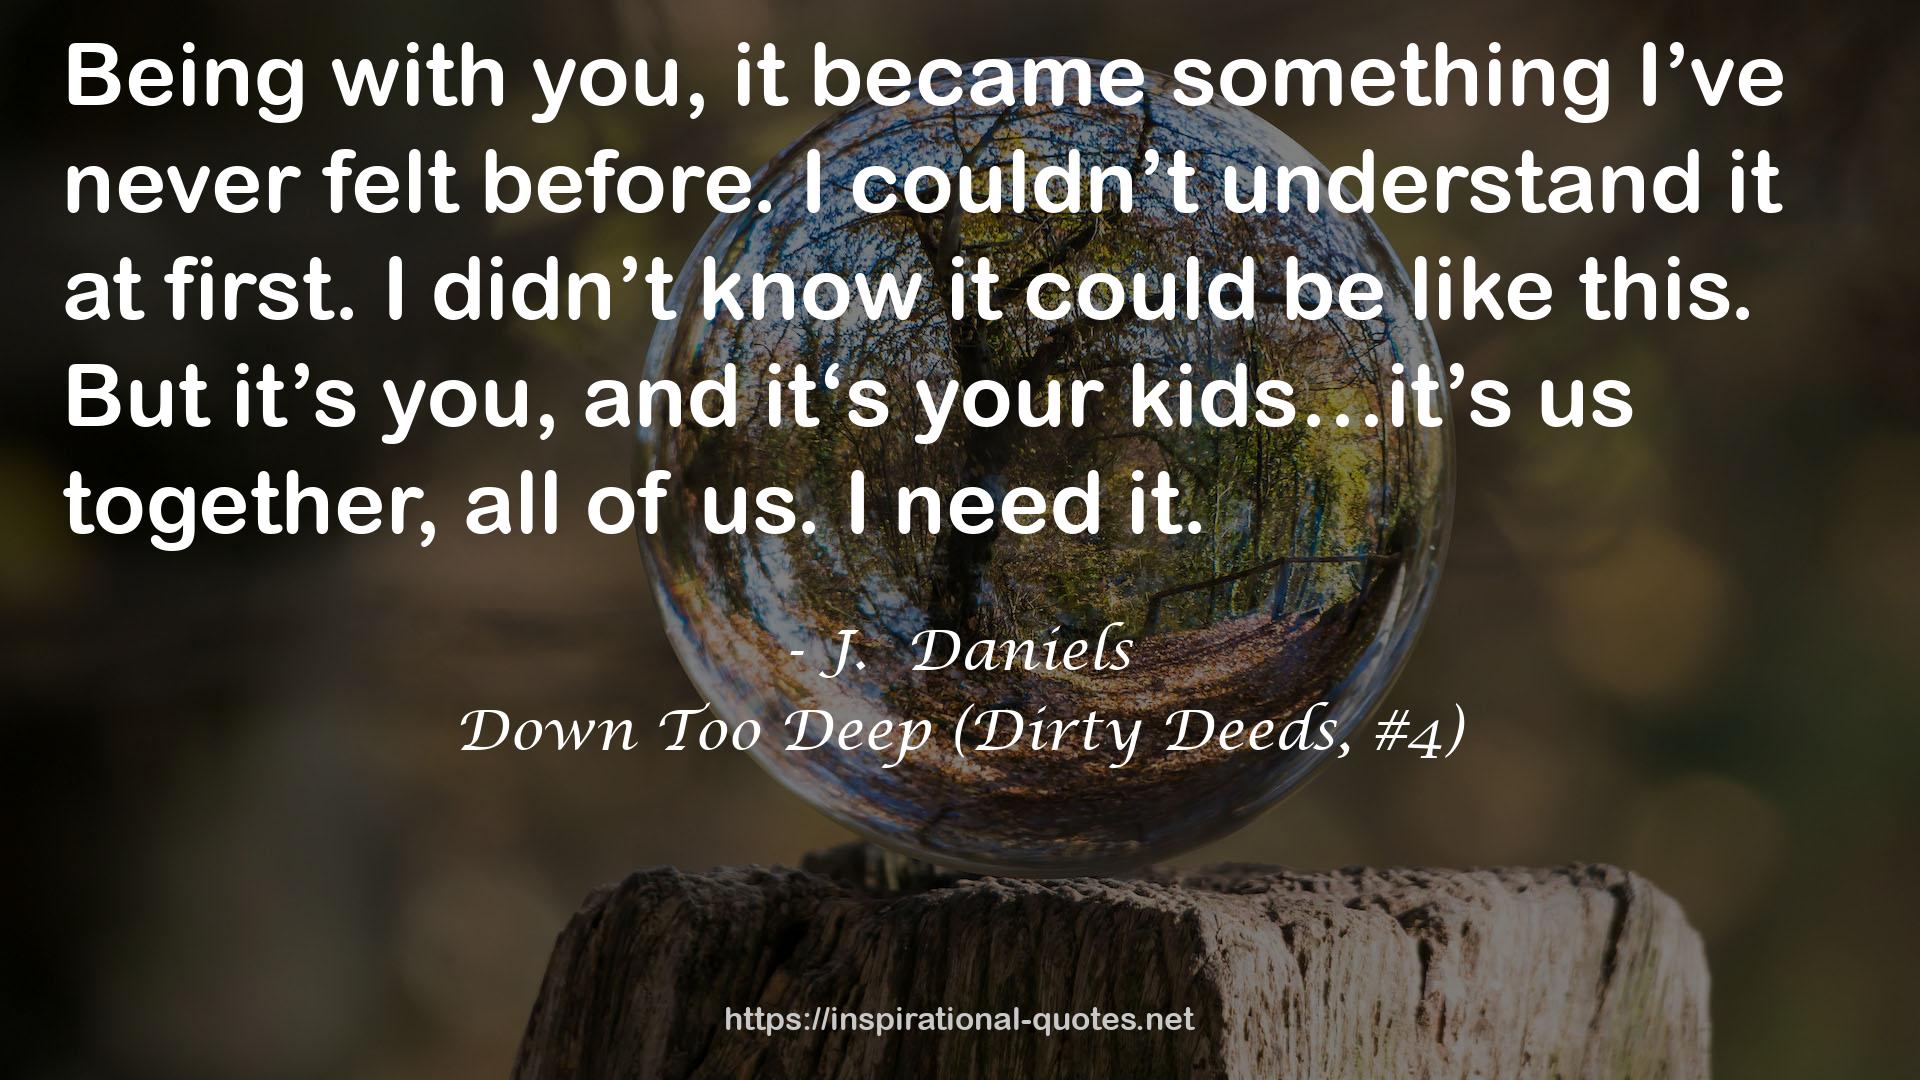 Down Too Deep (Dirty Deeds, #4) QUOTES